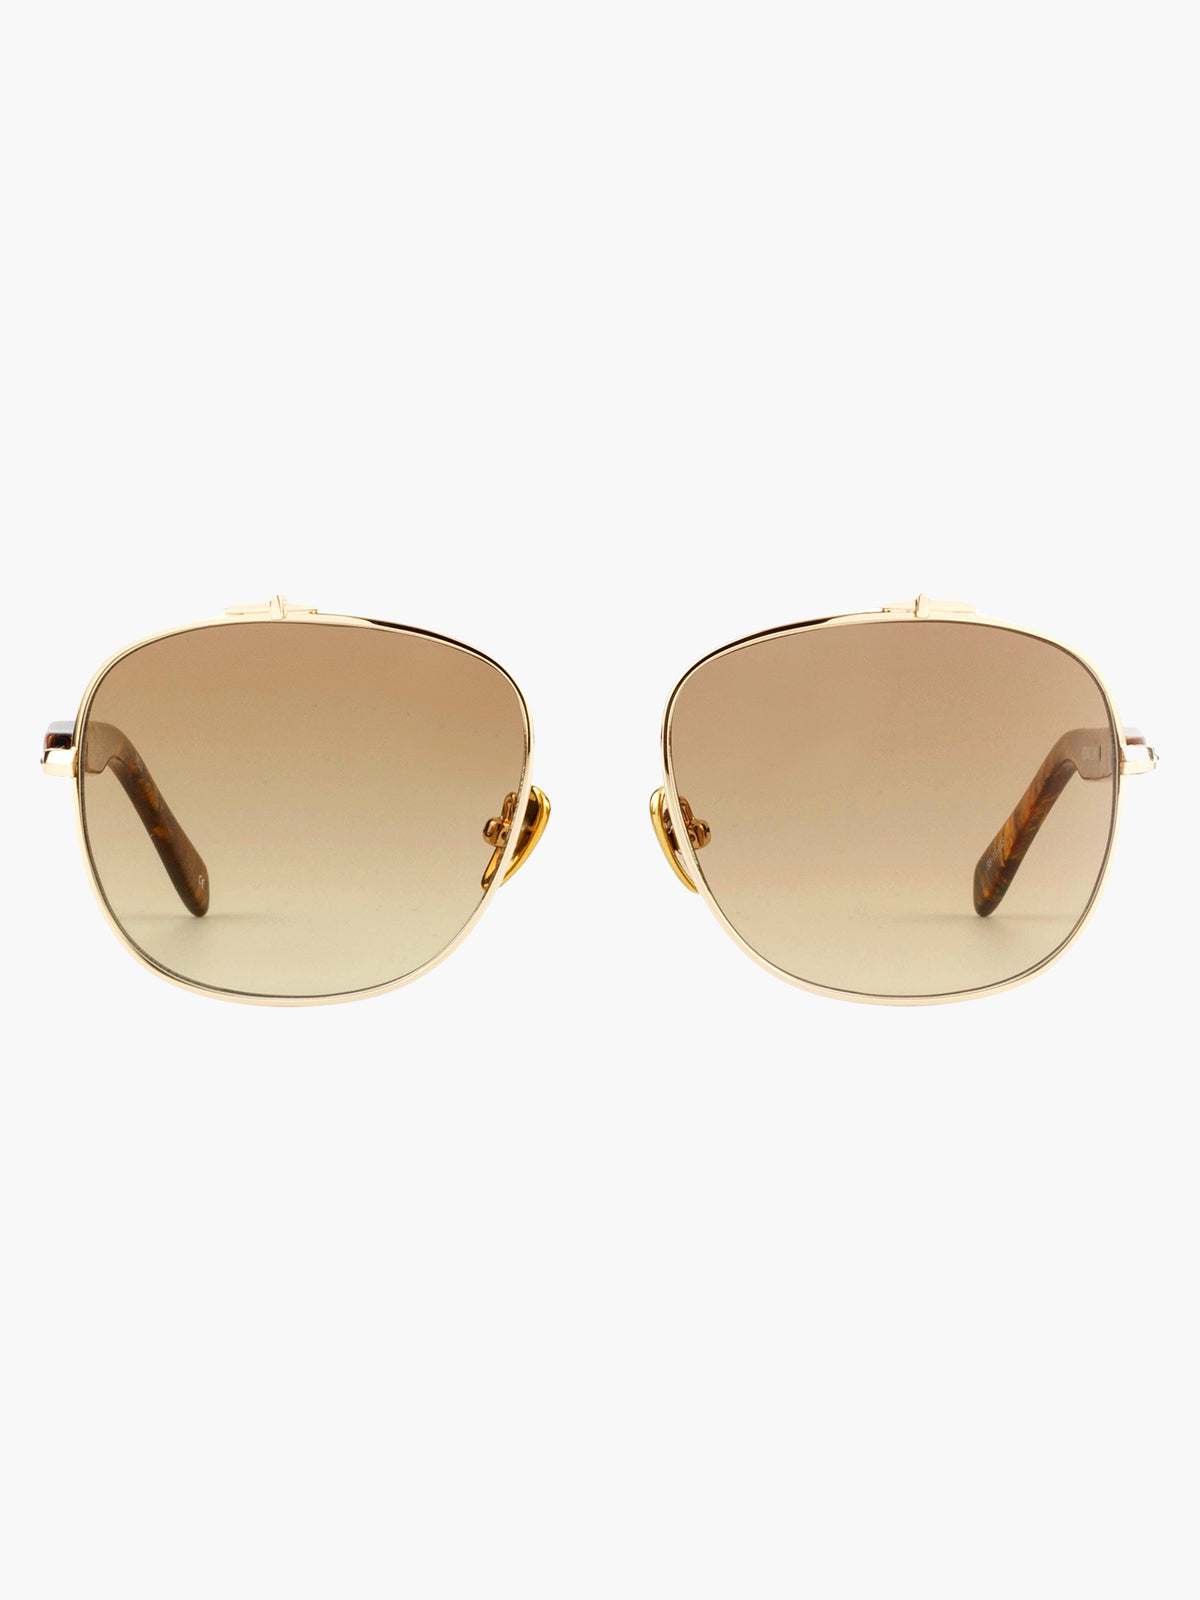 Malcolm No Middle 12 | Polished Gold/Brown Gradient Lens Malcolm No Middle 12 | Polished Gold/Brown Gradient Lens